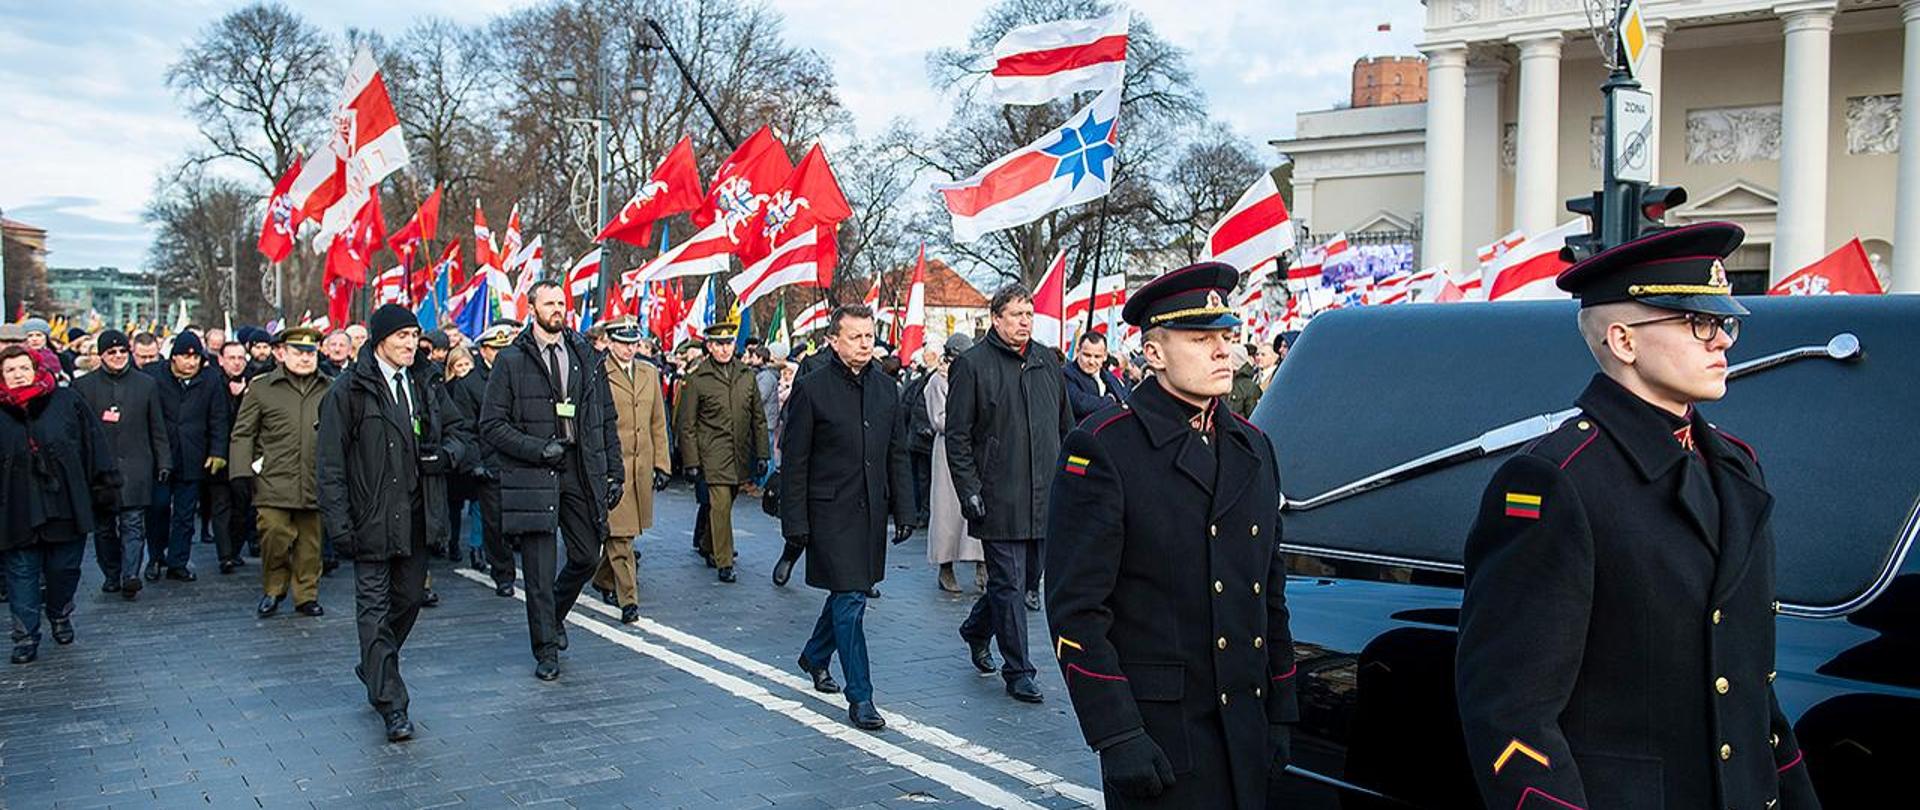 The head of the Ministry of National Defence in a funeral procession on the streets of Vilnius.